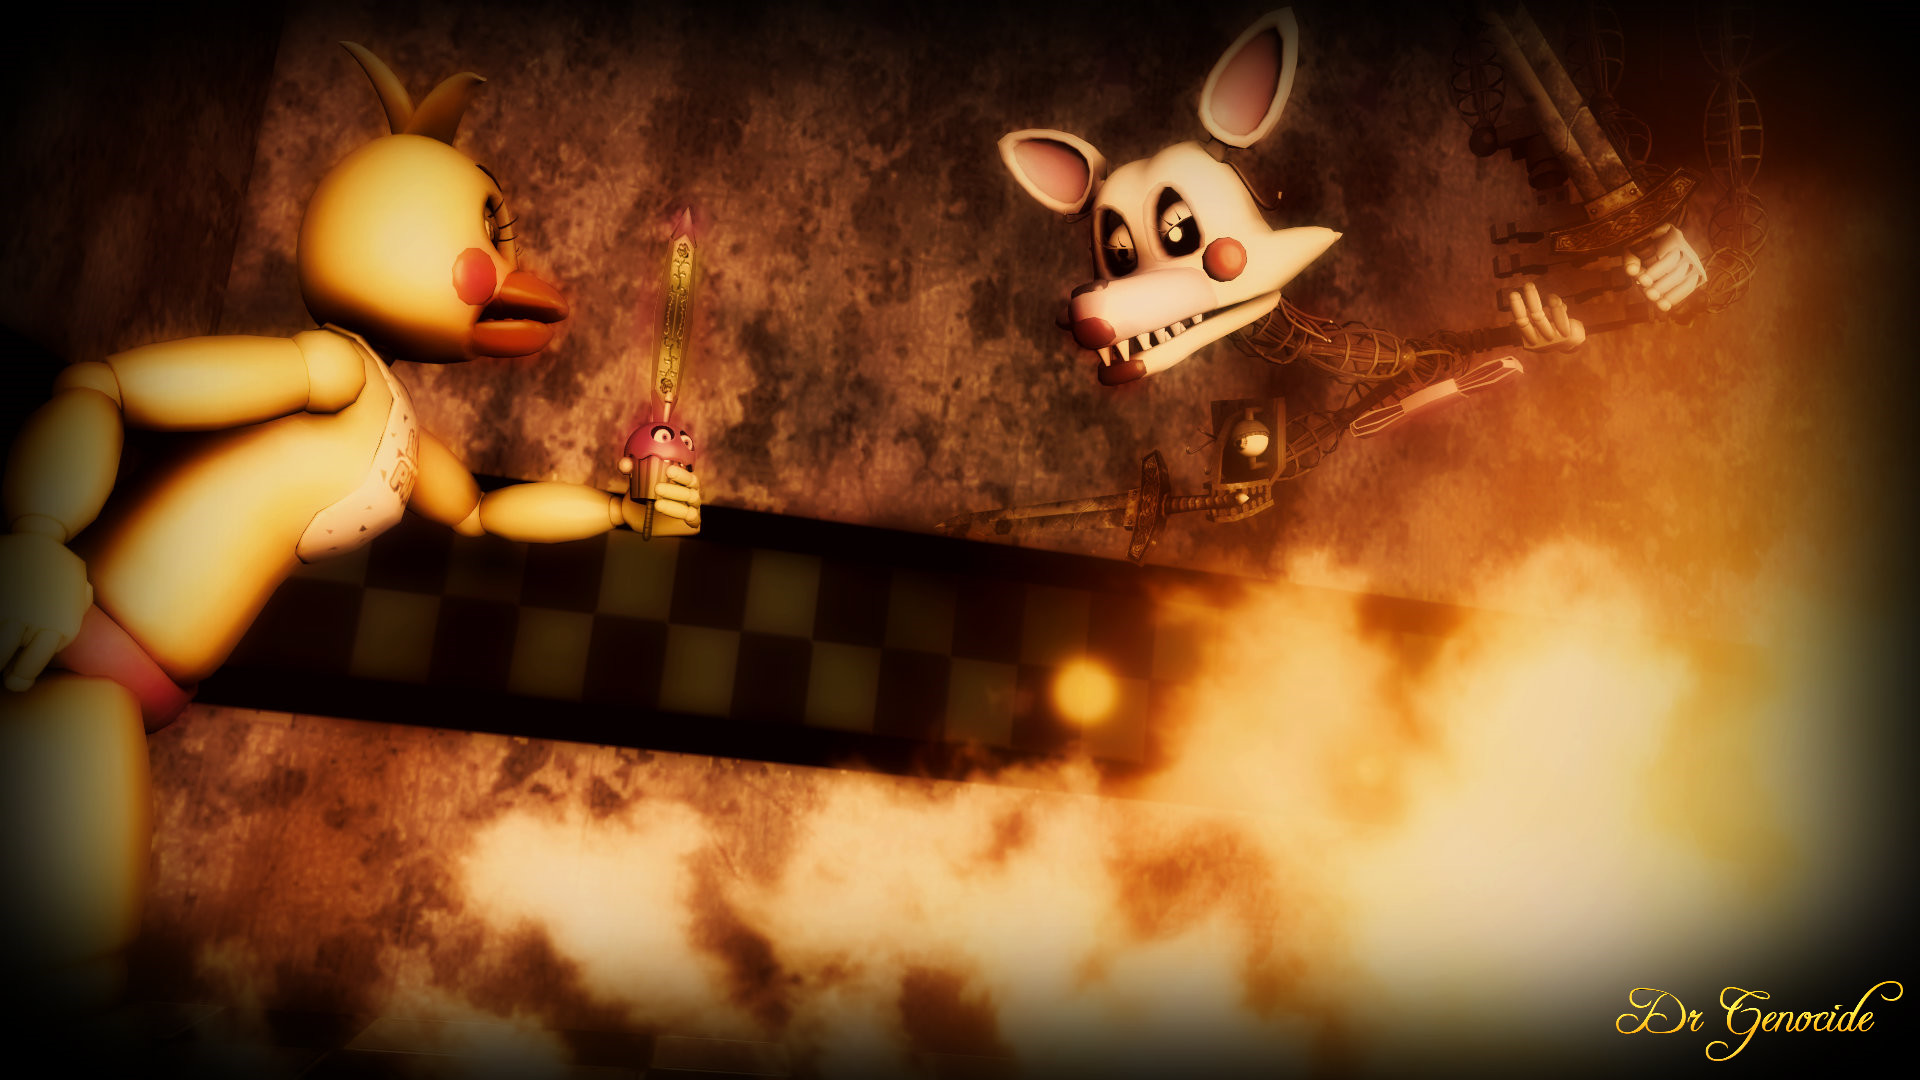 1920x1080 FNAF2 Toy Chica vs Mangle Wallpaper by DrGenocideSFM 